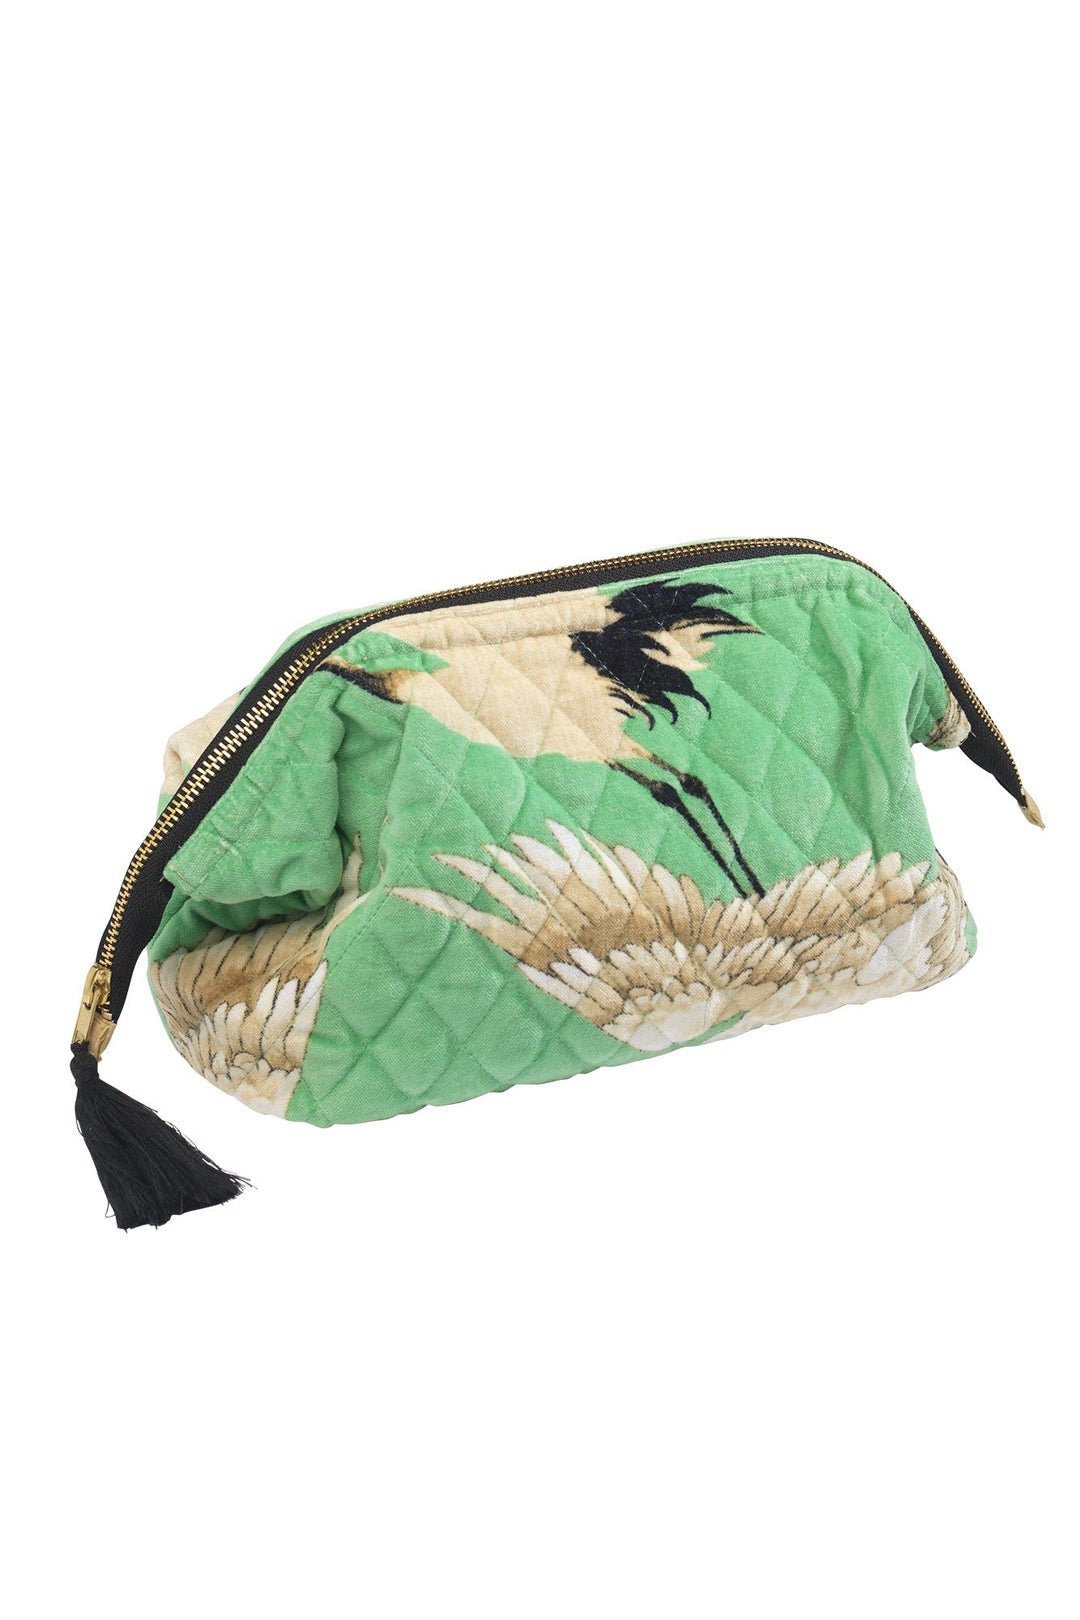 Women's accessories, gifts for her. Velvet make-up bag clutch bag in pea green and white stork print by One Hundred Stars